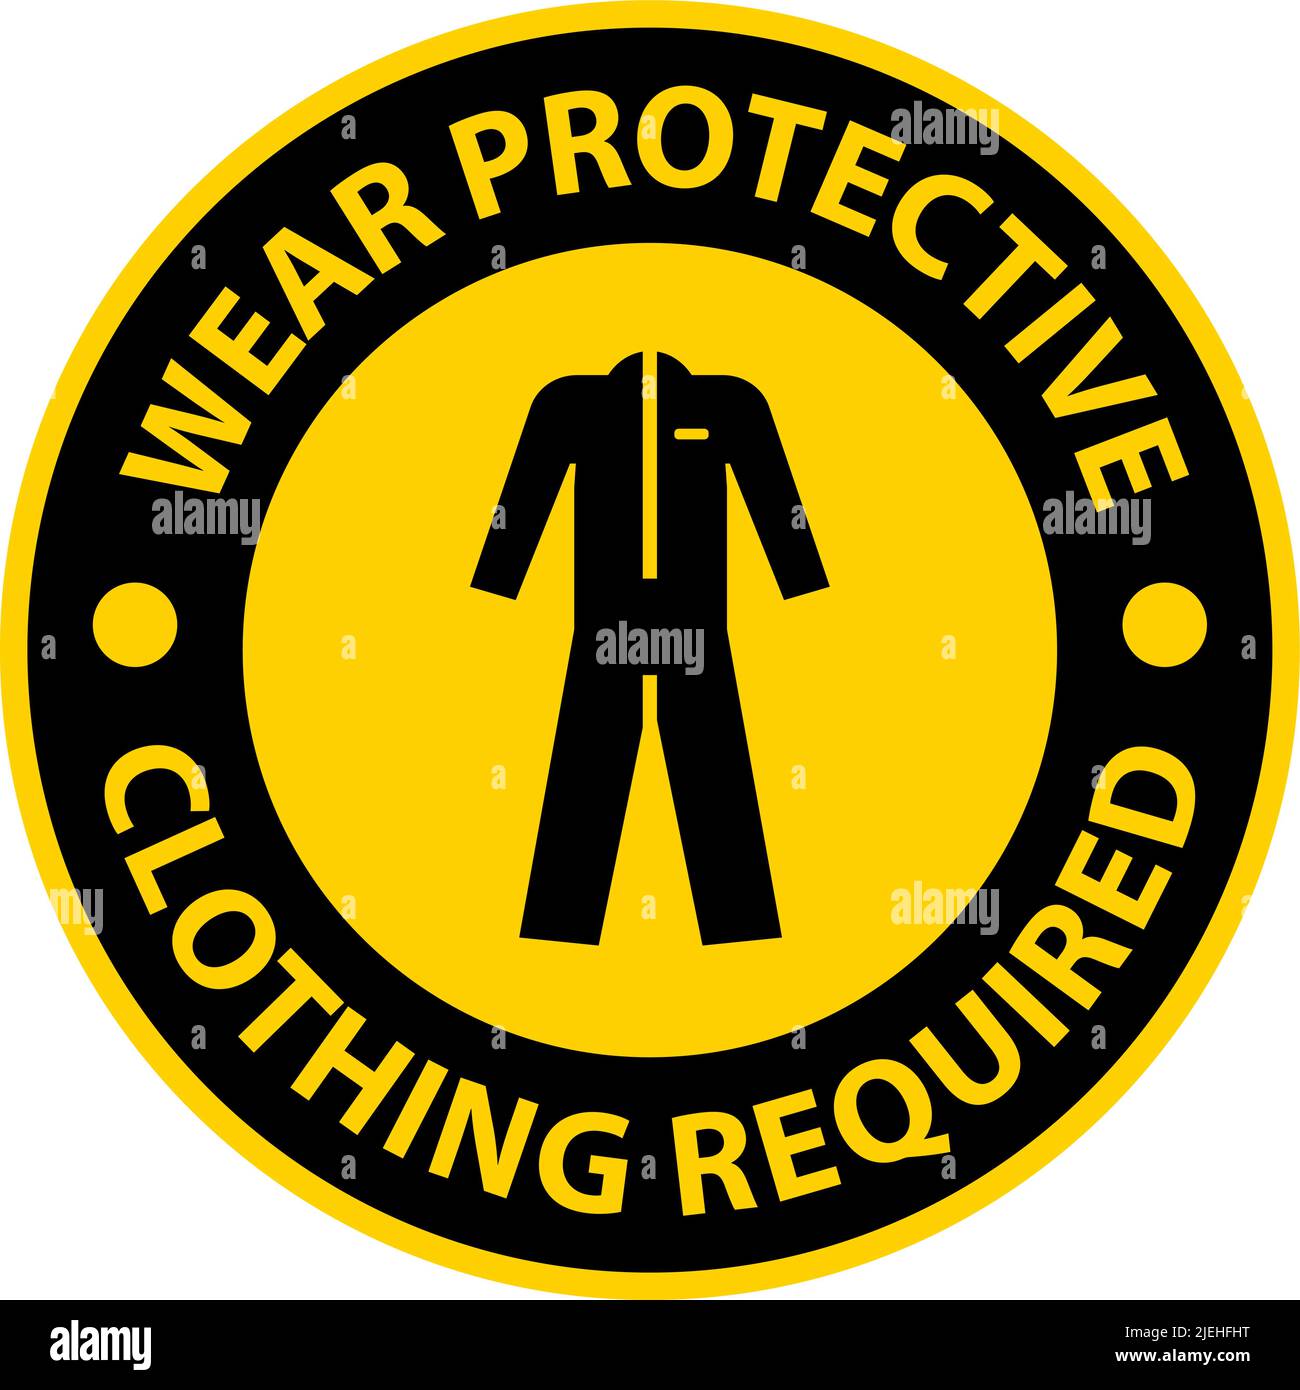 Industrial Worker With Safety Suit Mandatory Use Warning Sign Wear